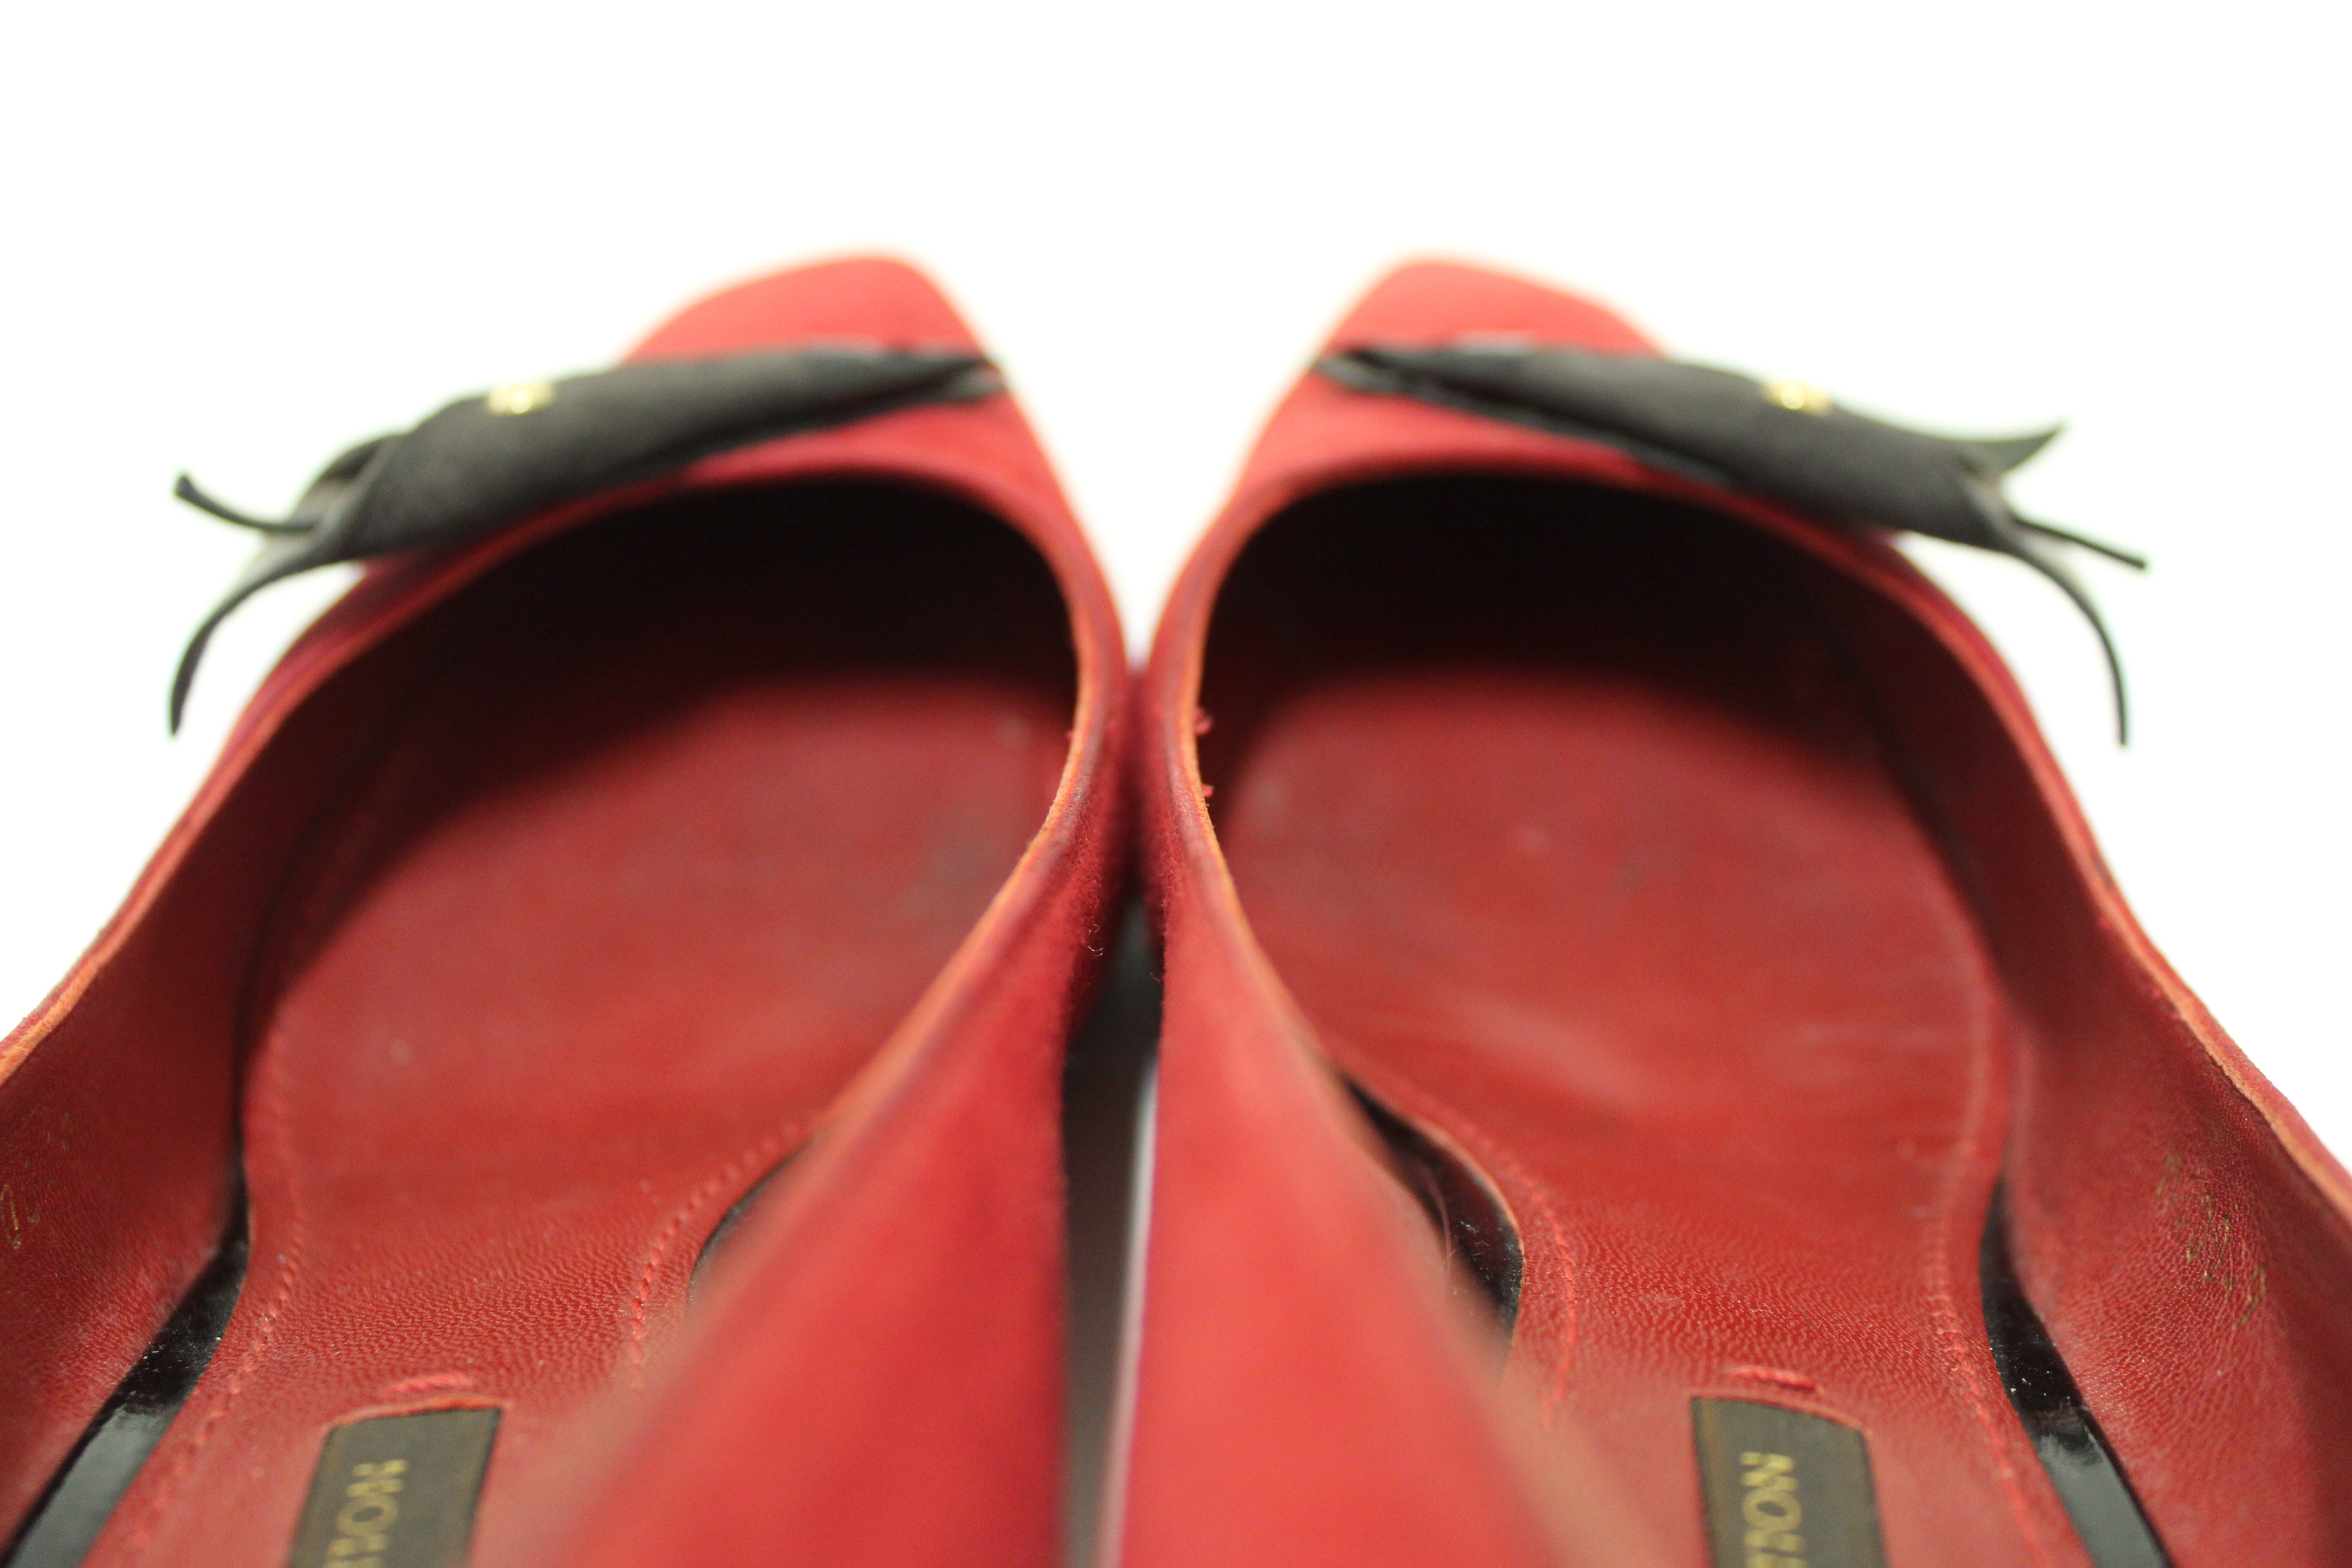 Louis Vuitton Red Leather Dice Pumps Size 38